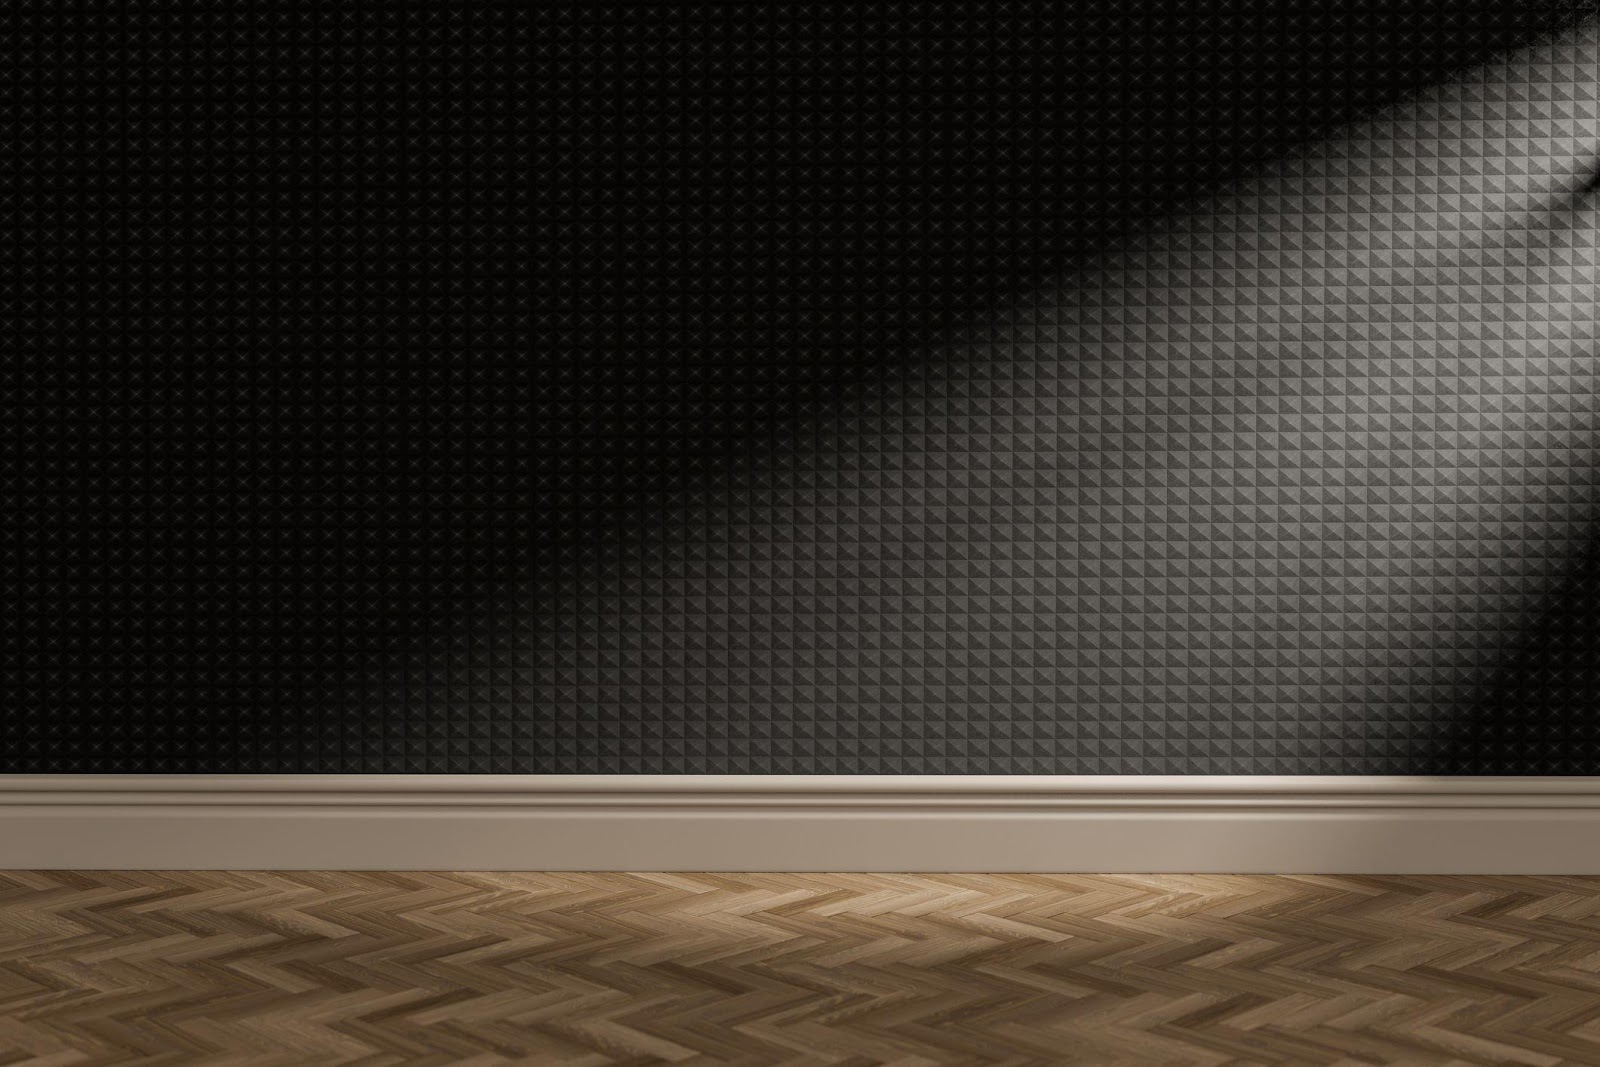 sun-lit-room-with-soundproofing-foam-wall-royalty-free-image-1603990724_.jpg